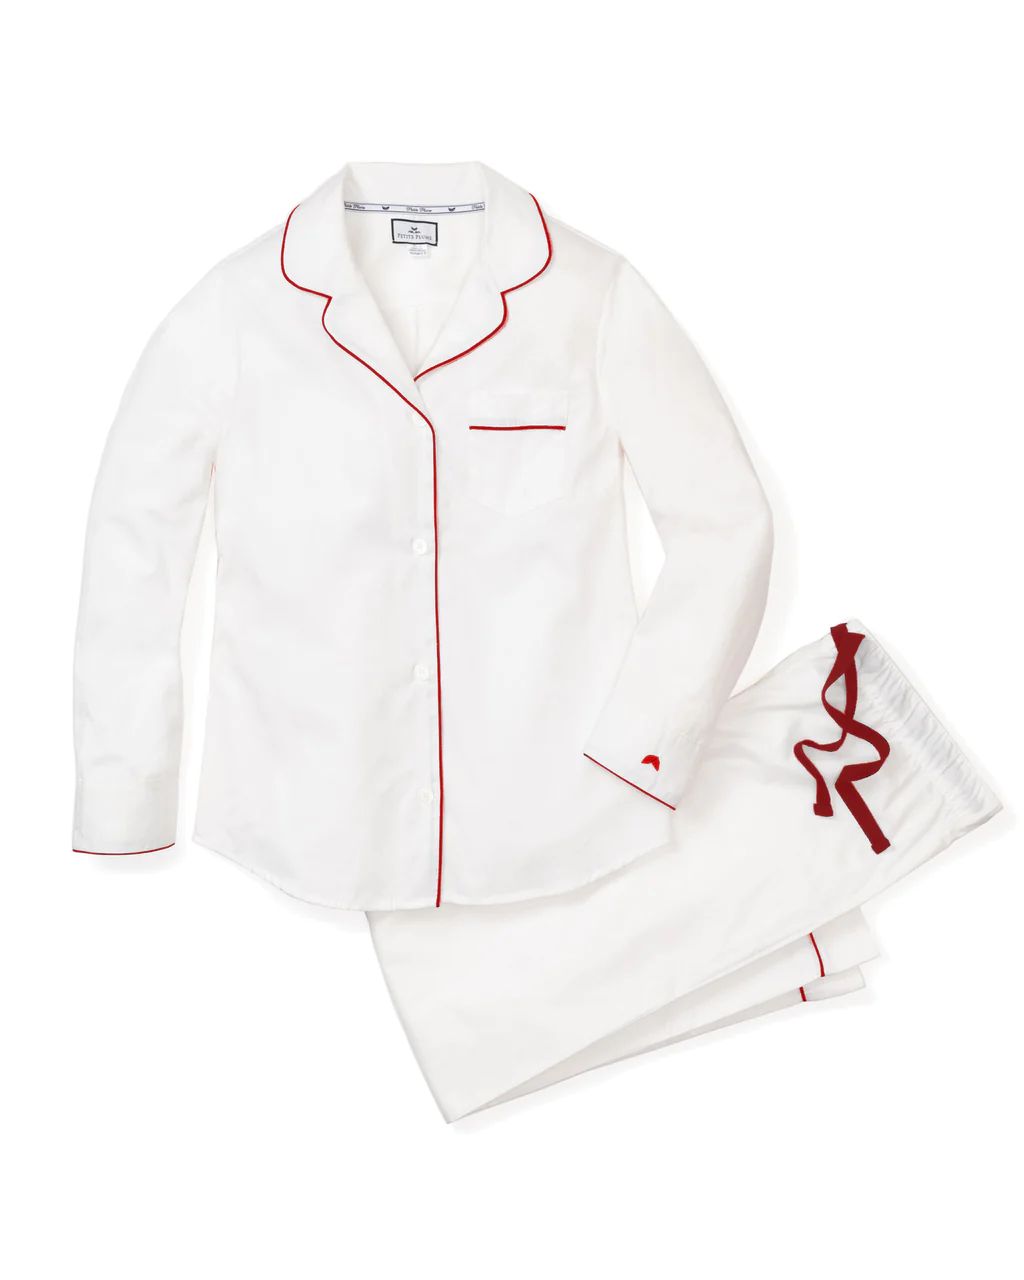 Women's Classic White Twill Pajama Set with Red Piping | Petite Plume